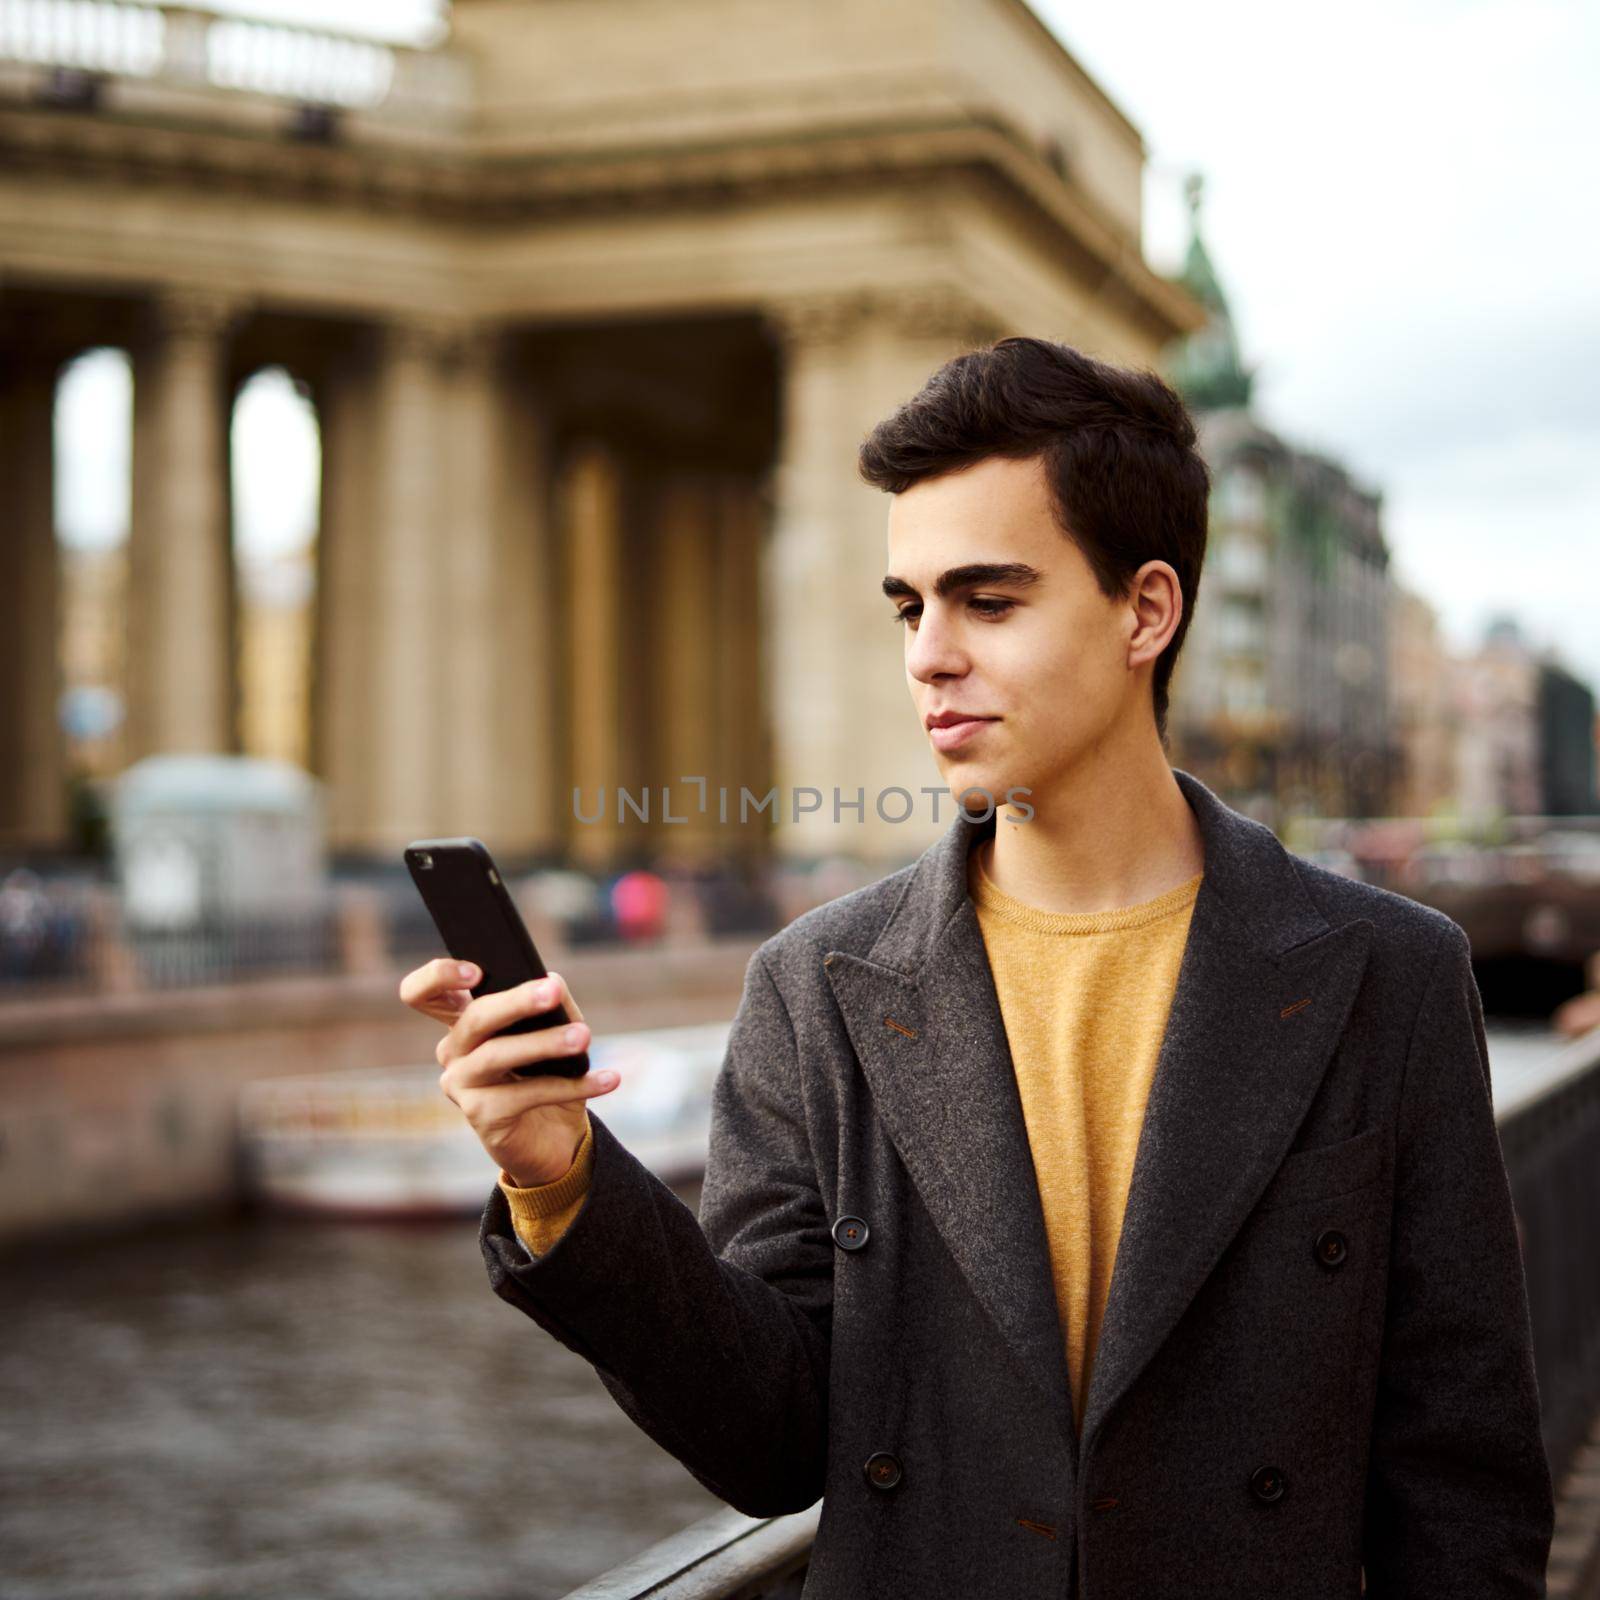 Handsome stylish fashionable man talking on phone, dialing chat message, brunette in elegant gray coat is standing on street in a historical center. Young man with dark hair, thick eyebrows.